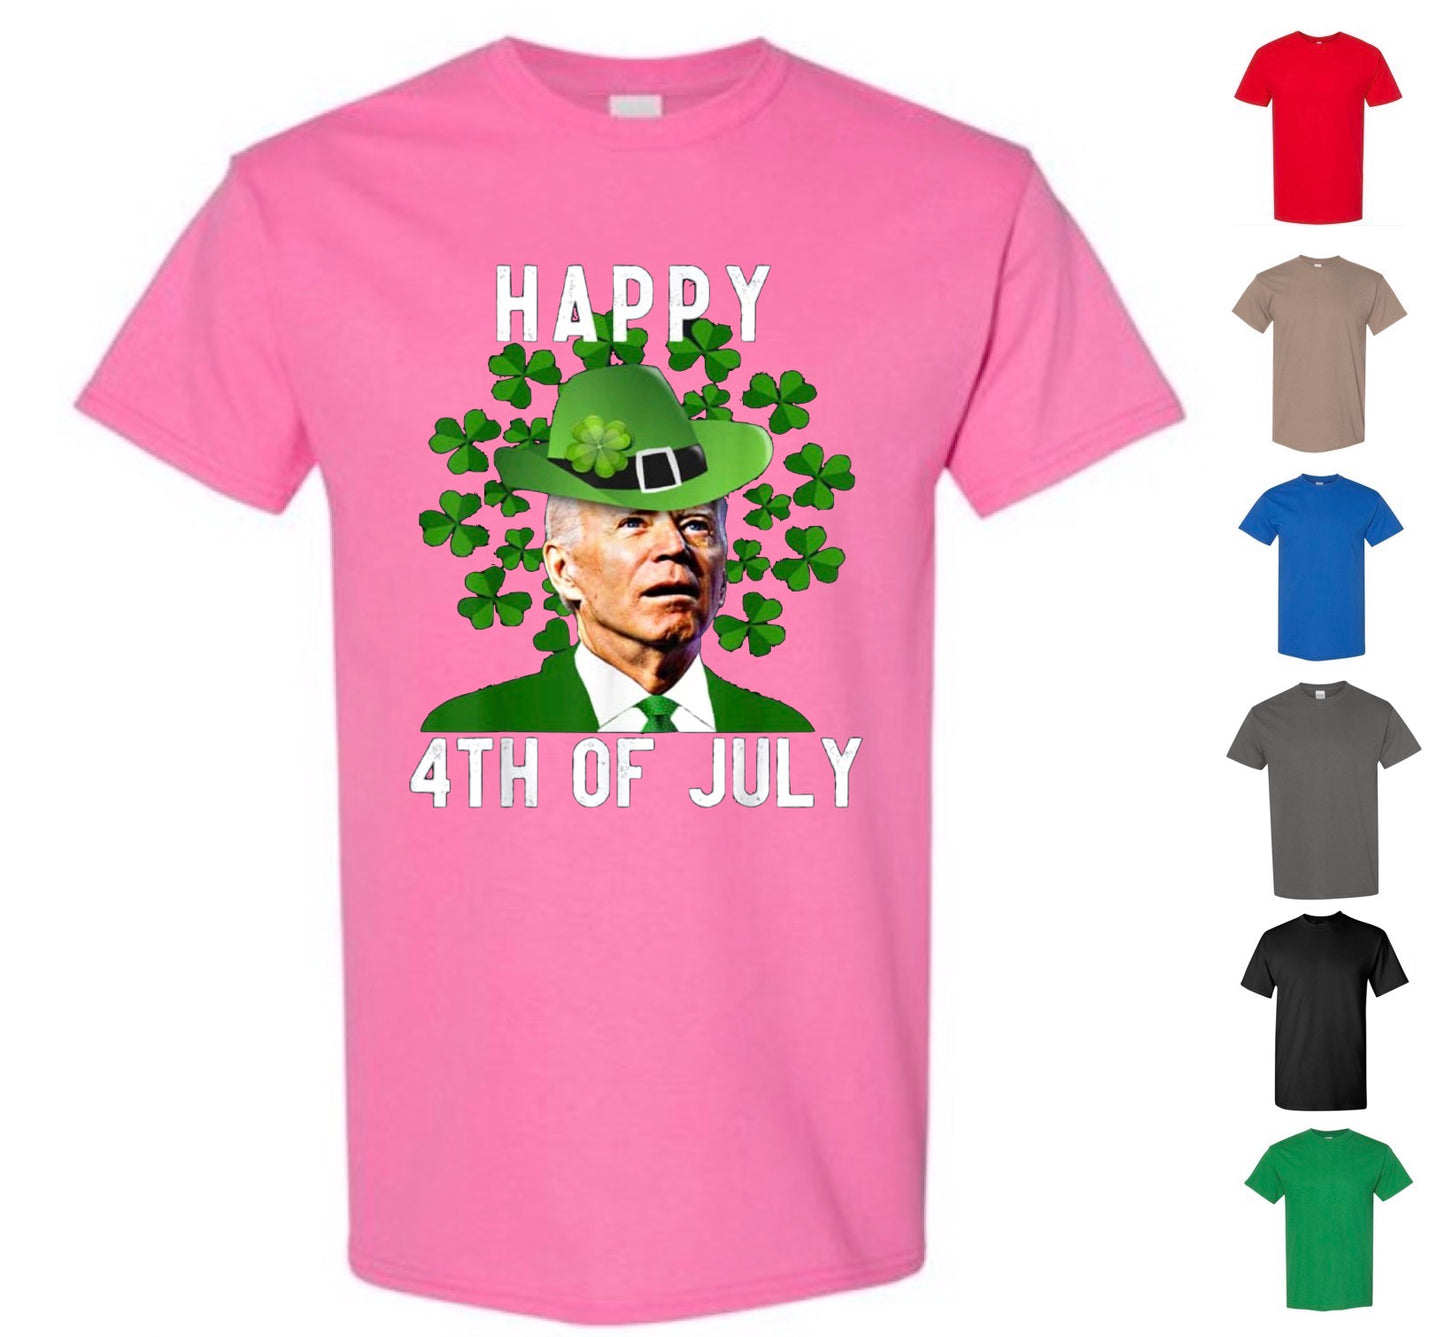 Happy 4th of July T-Shirt (FREE Shipping)